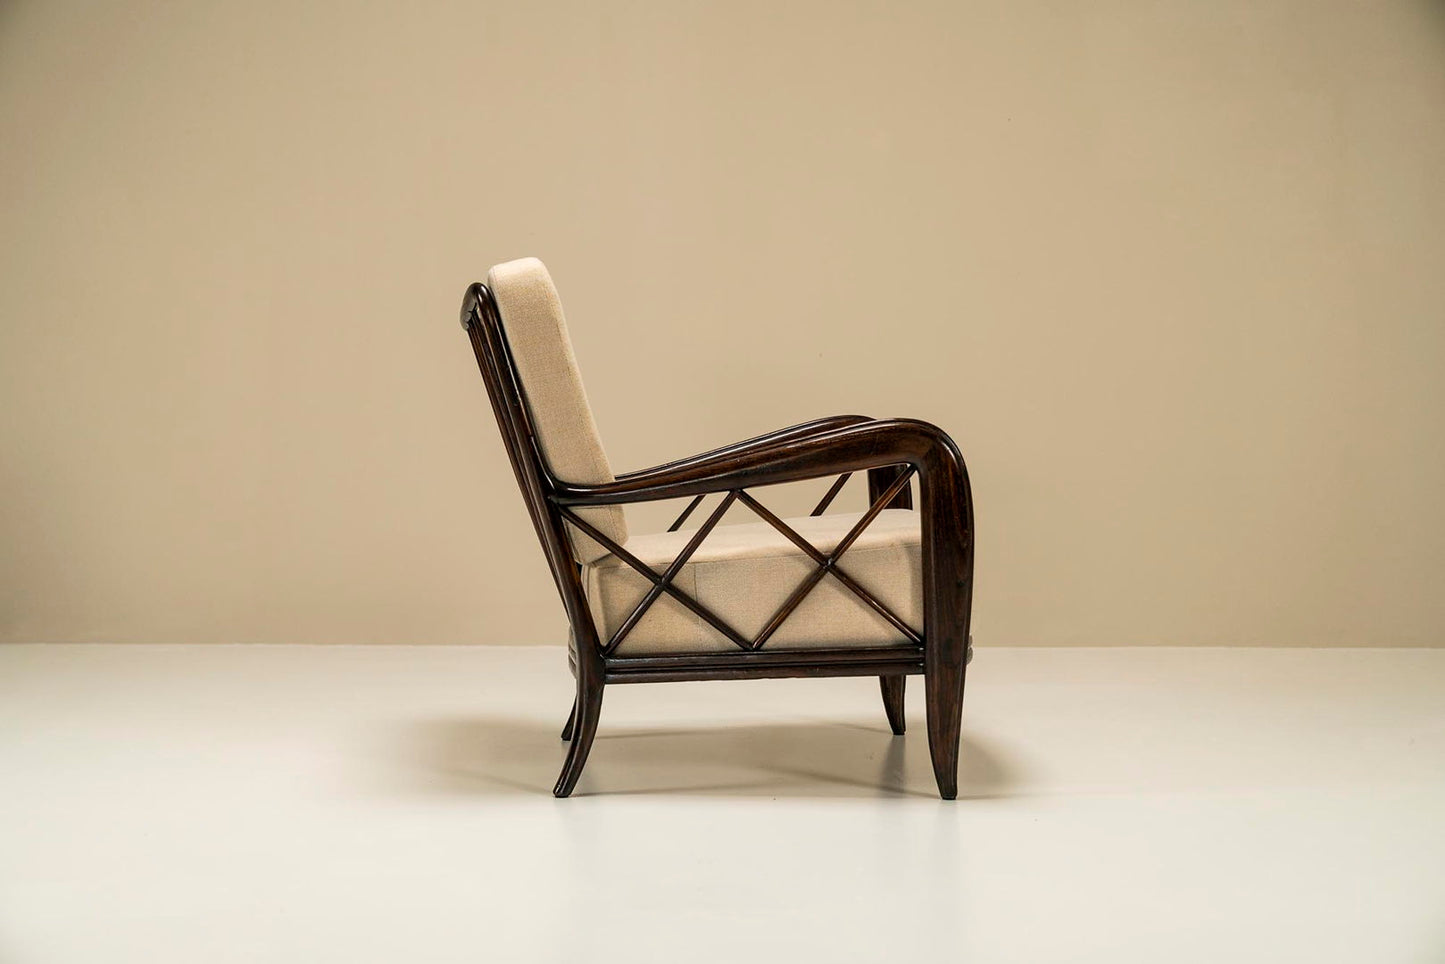 Set Of Two Paolo Buffa Lounge Chairs In Ebonized Wood And Beige Upholstery, Italy 1940s